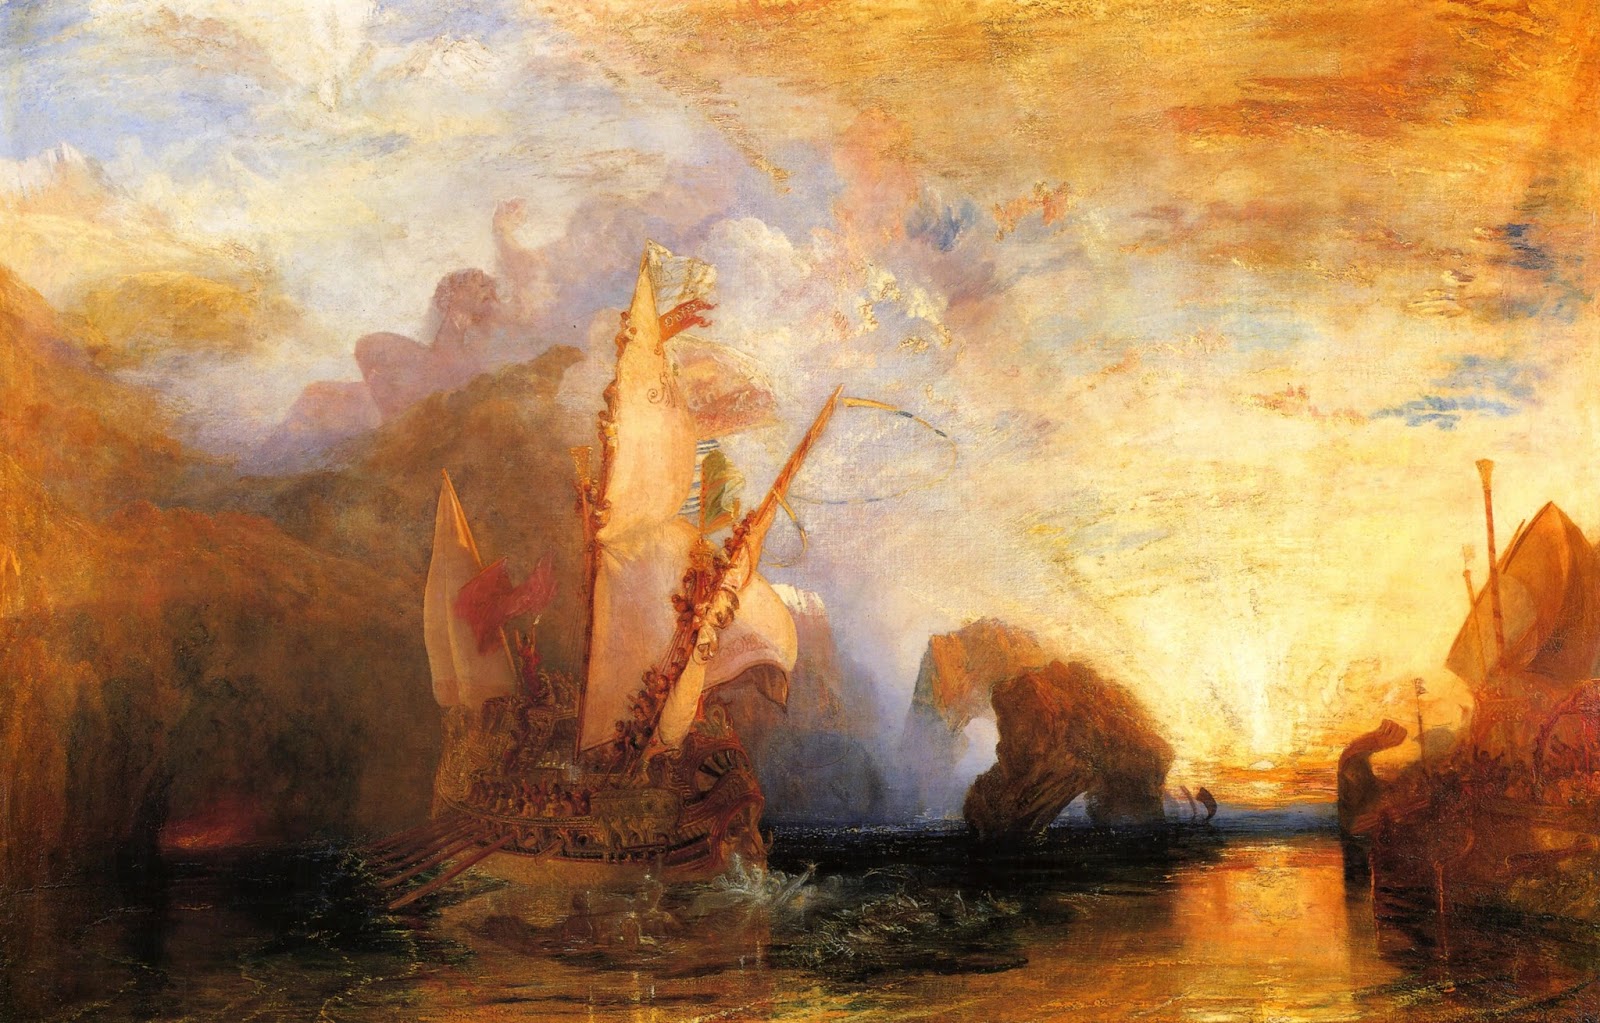 J.M.W. Turner, Biography, Paintings, Watercolors, & Facts